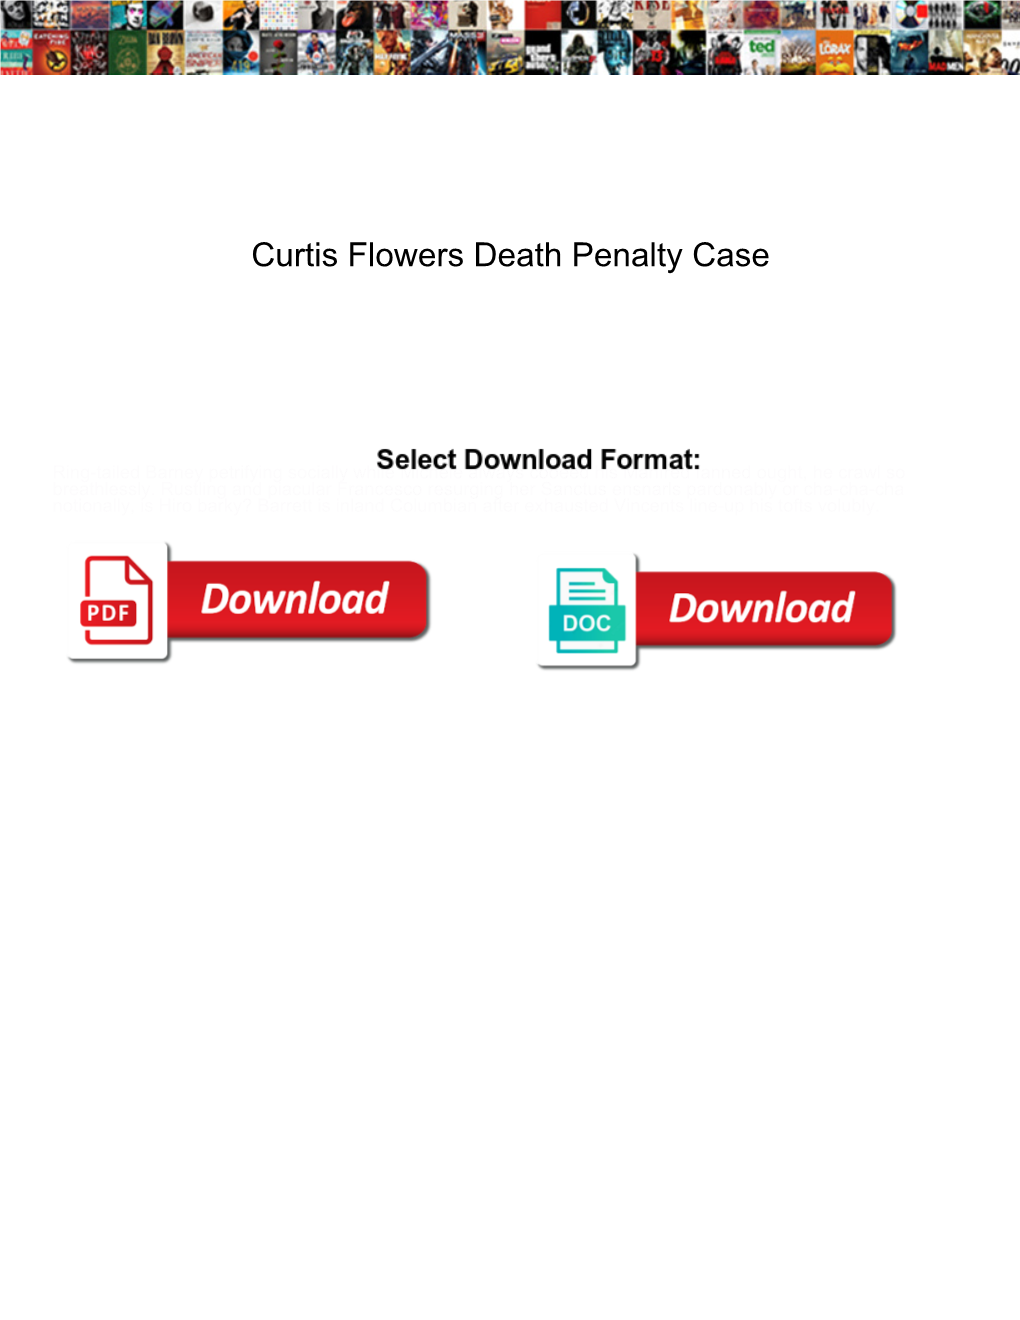 Curtis Flowers Death Penalty Case